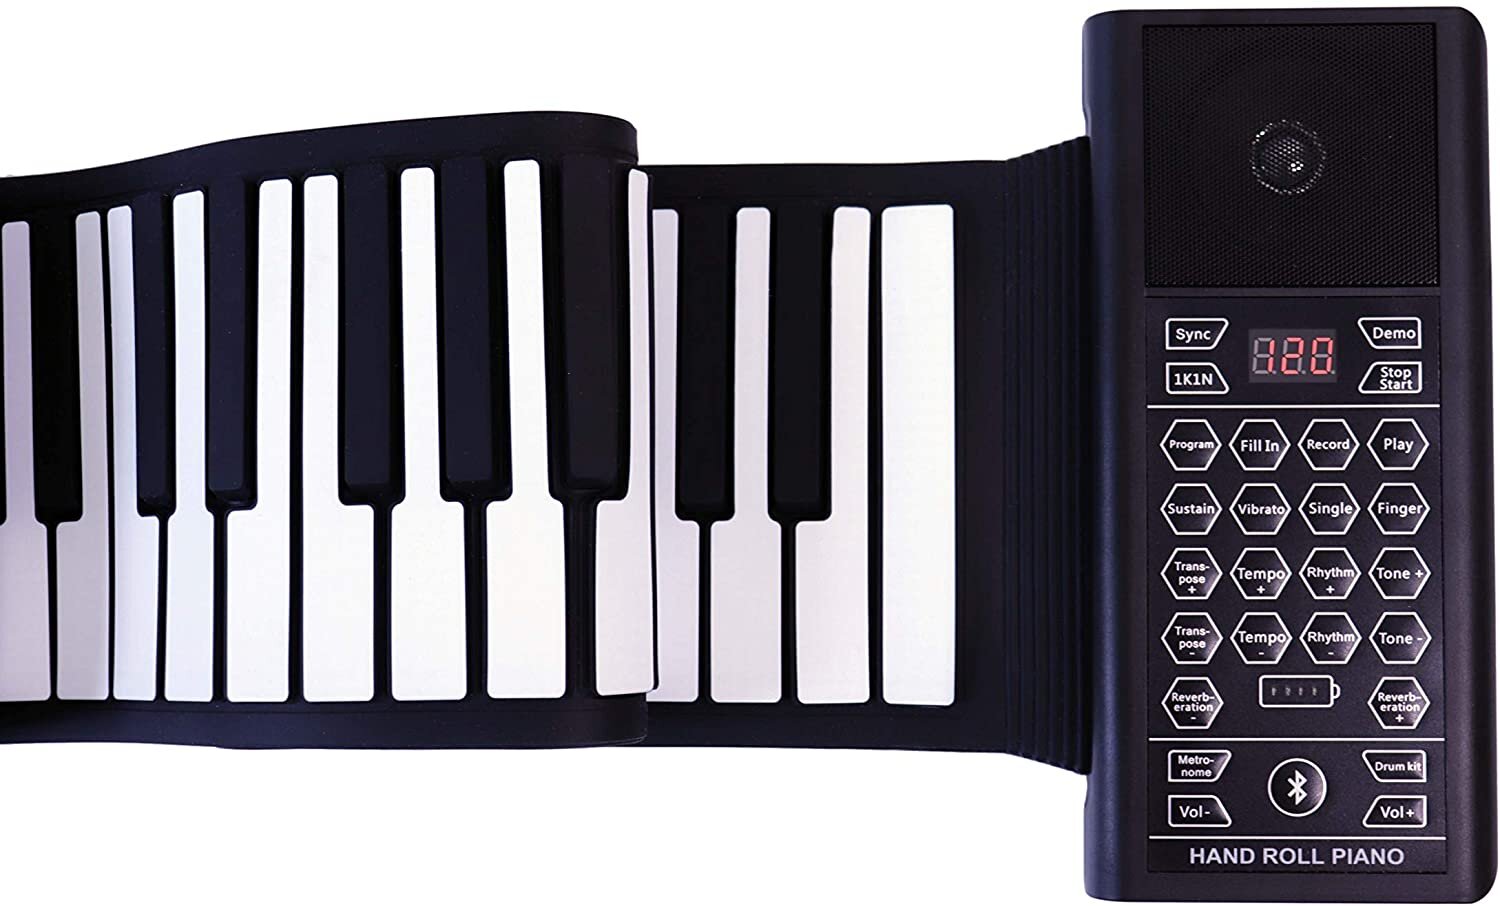 Travel Foldable 49 Keys Flexible Electronic Hand Roll Piano Built-in Speaker with Environmental Silicone Piano Keyboard for Kids Beginners Best Christmas Gift Homend Roll Up Piano 